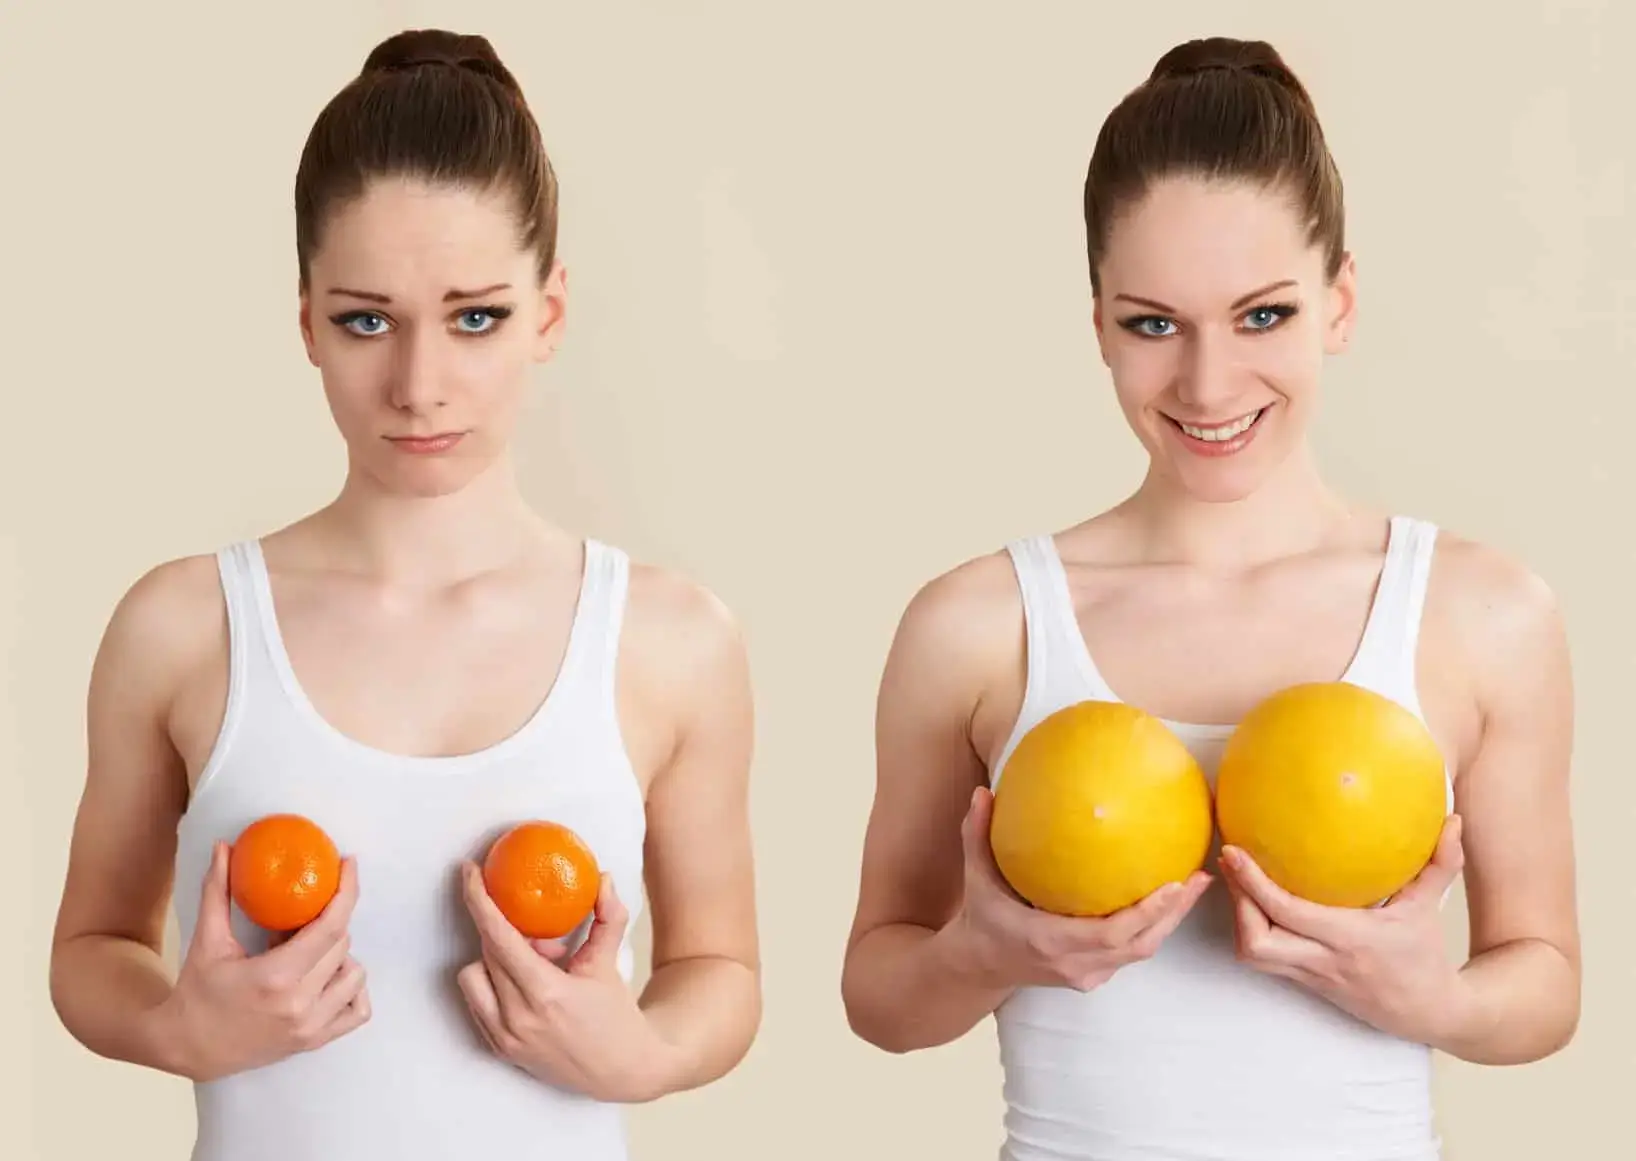 Tips for breast augmentation recovery